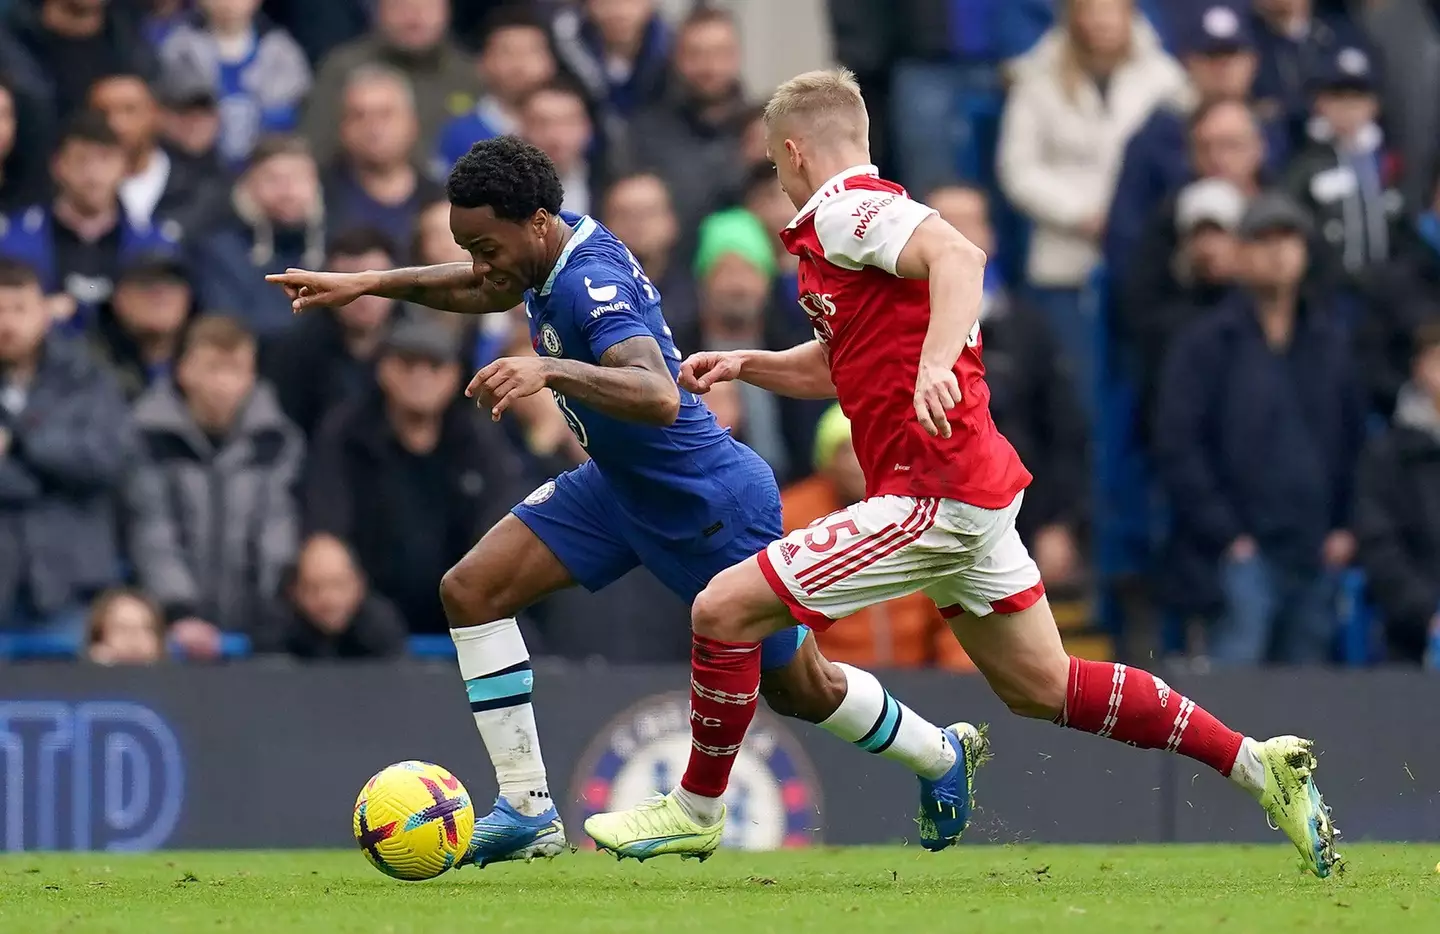 Chelsea’s Raheem Sterling (left) and Arsenal’s Oleksandr Zinchenko battle for the ball during the Premier League match. (Alamy)